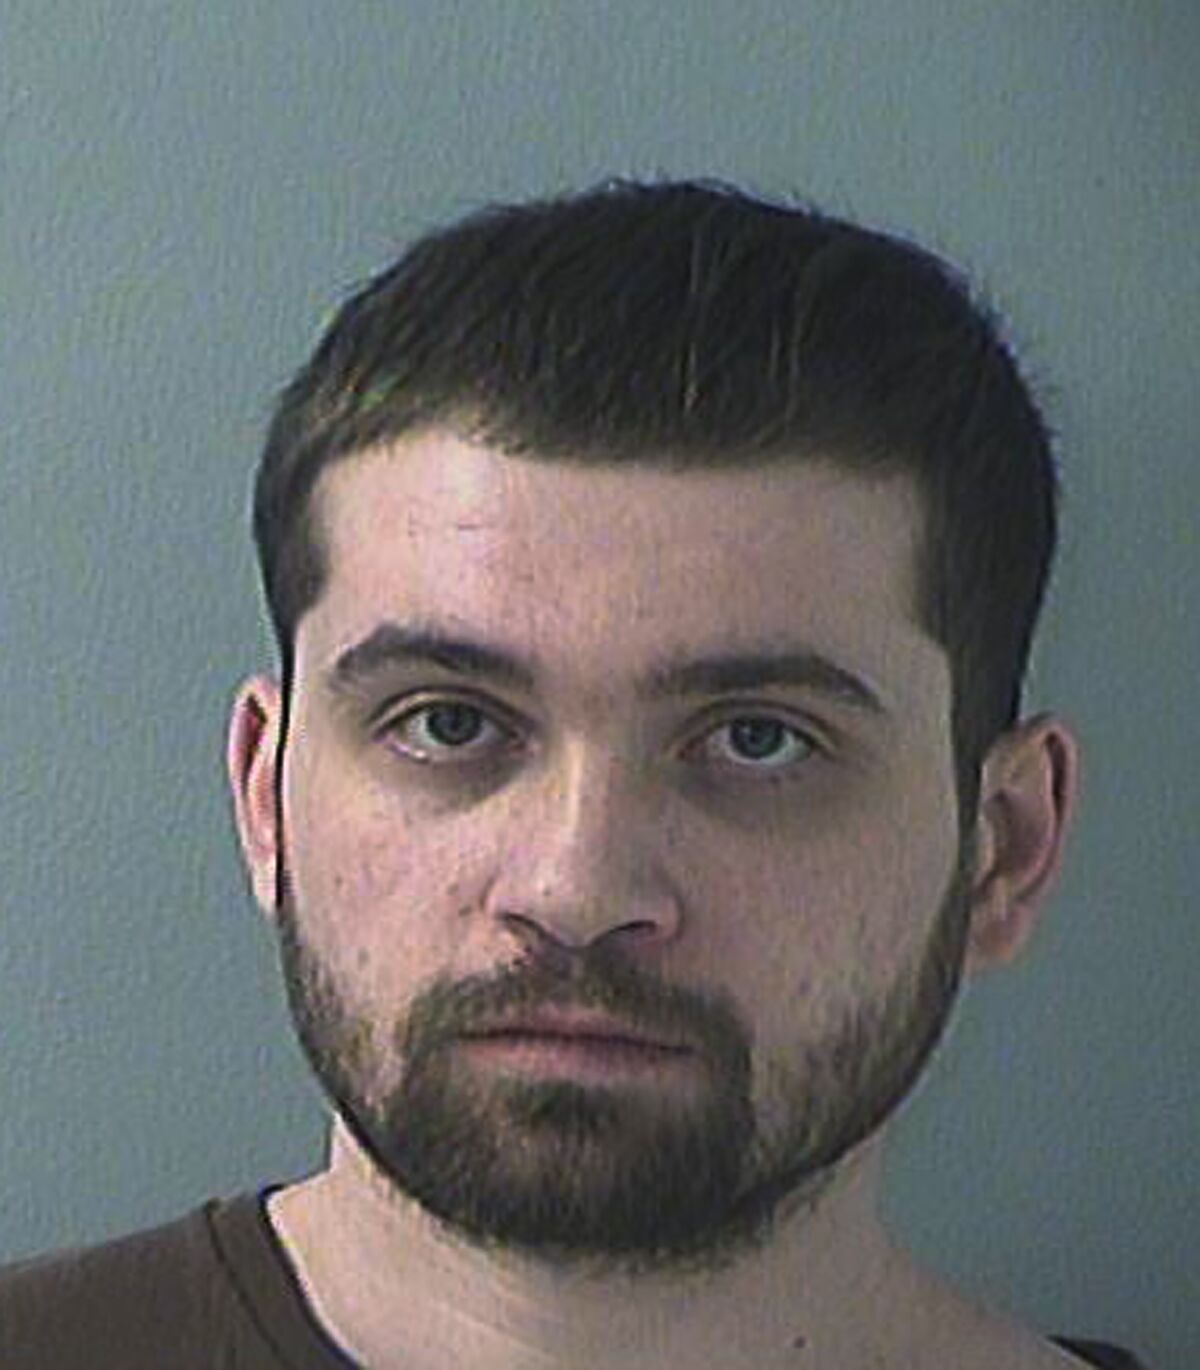 FILE - This 2019 photo provided by the Butler County (Ohio) Jail shows Brian Rini in Hamilton, Ohio. A federal judge plans to complete sentencing Tuesday, Dec. 15, 2020 for an Ohio man who falsely claimed to be a long-missing Illinois child. Rini, now 25, was initially sentenced earlier this year to two years behind bars. But the judge wanted to see results of a pre-sentencing investigation, likely including details of Rini's mental and physical conditions, before officially entering his sentence. (Butler County (Ohio) Jail via AP, File)